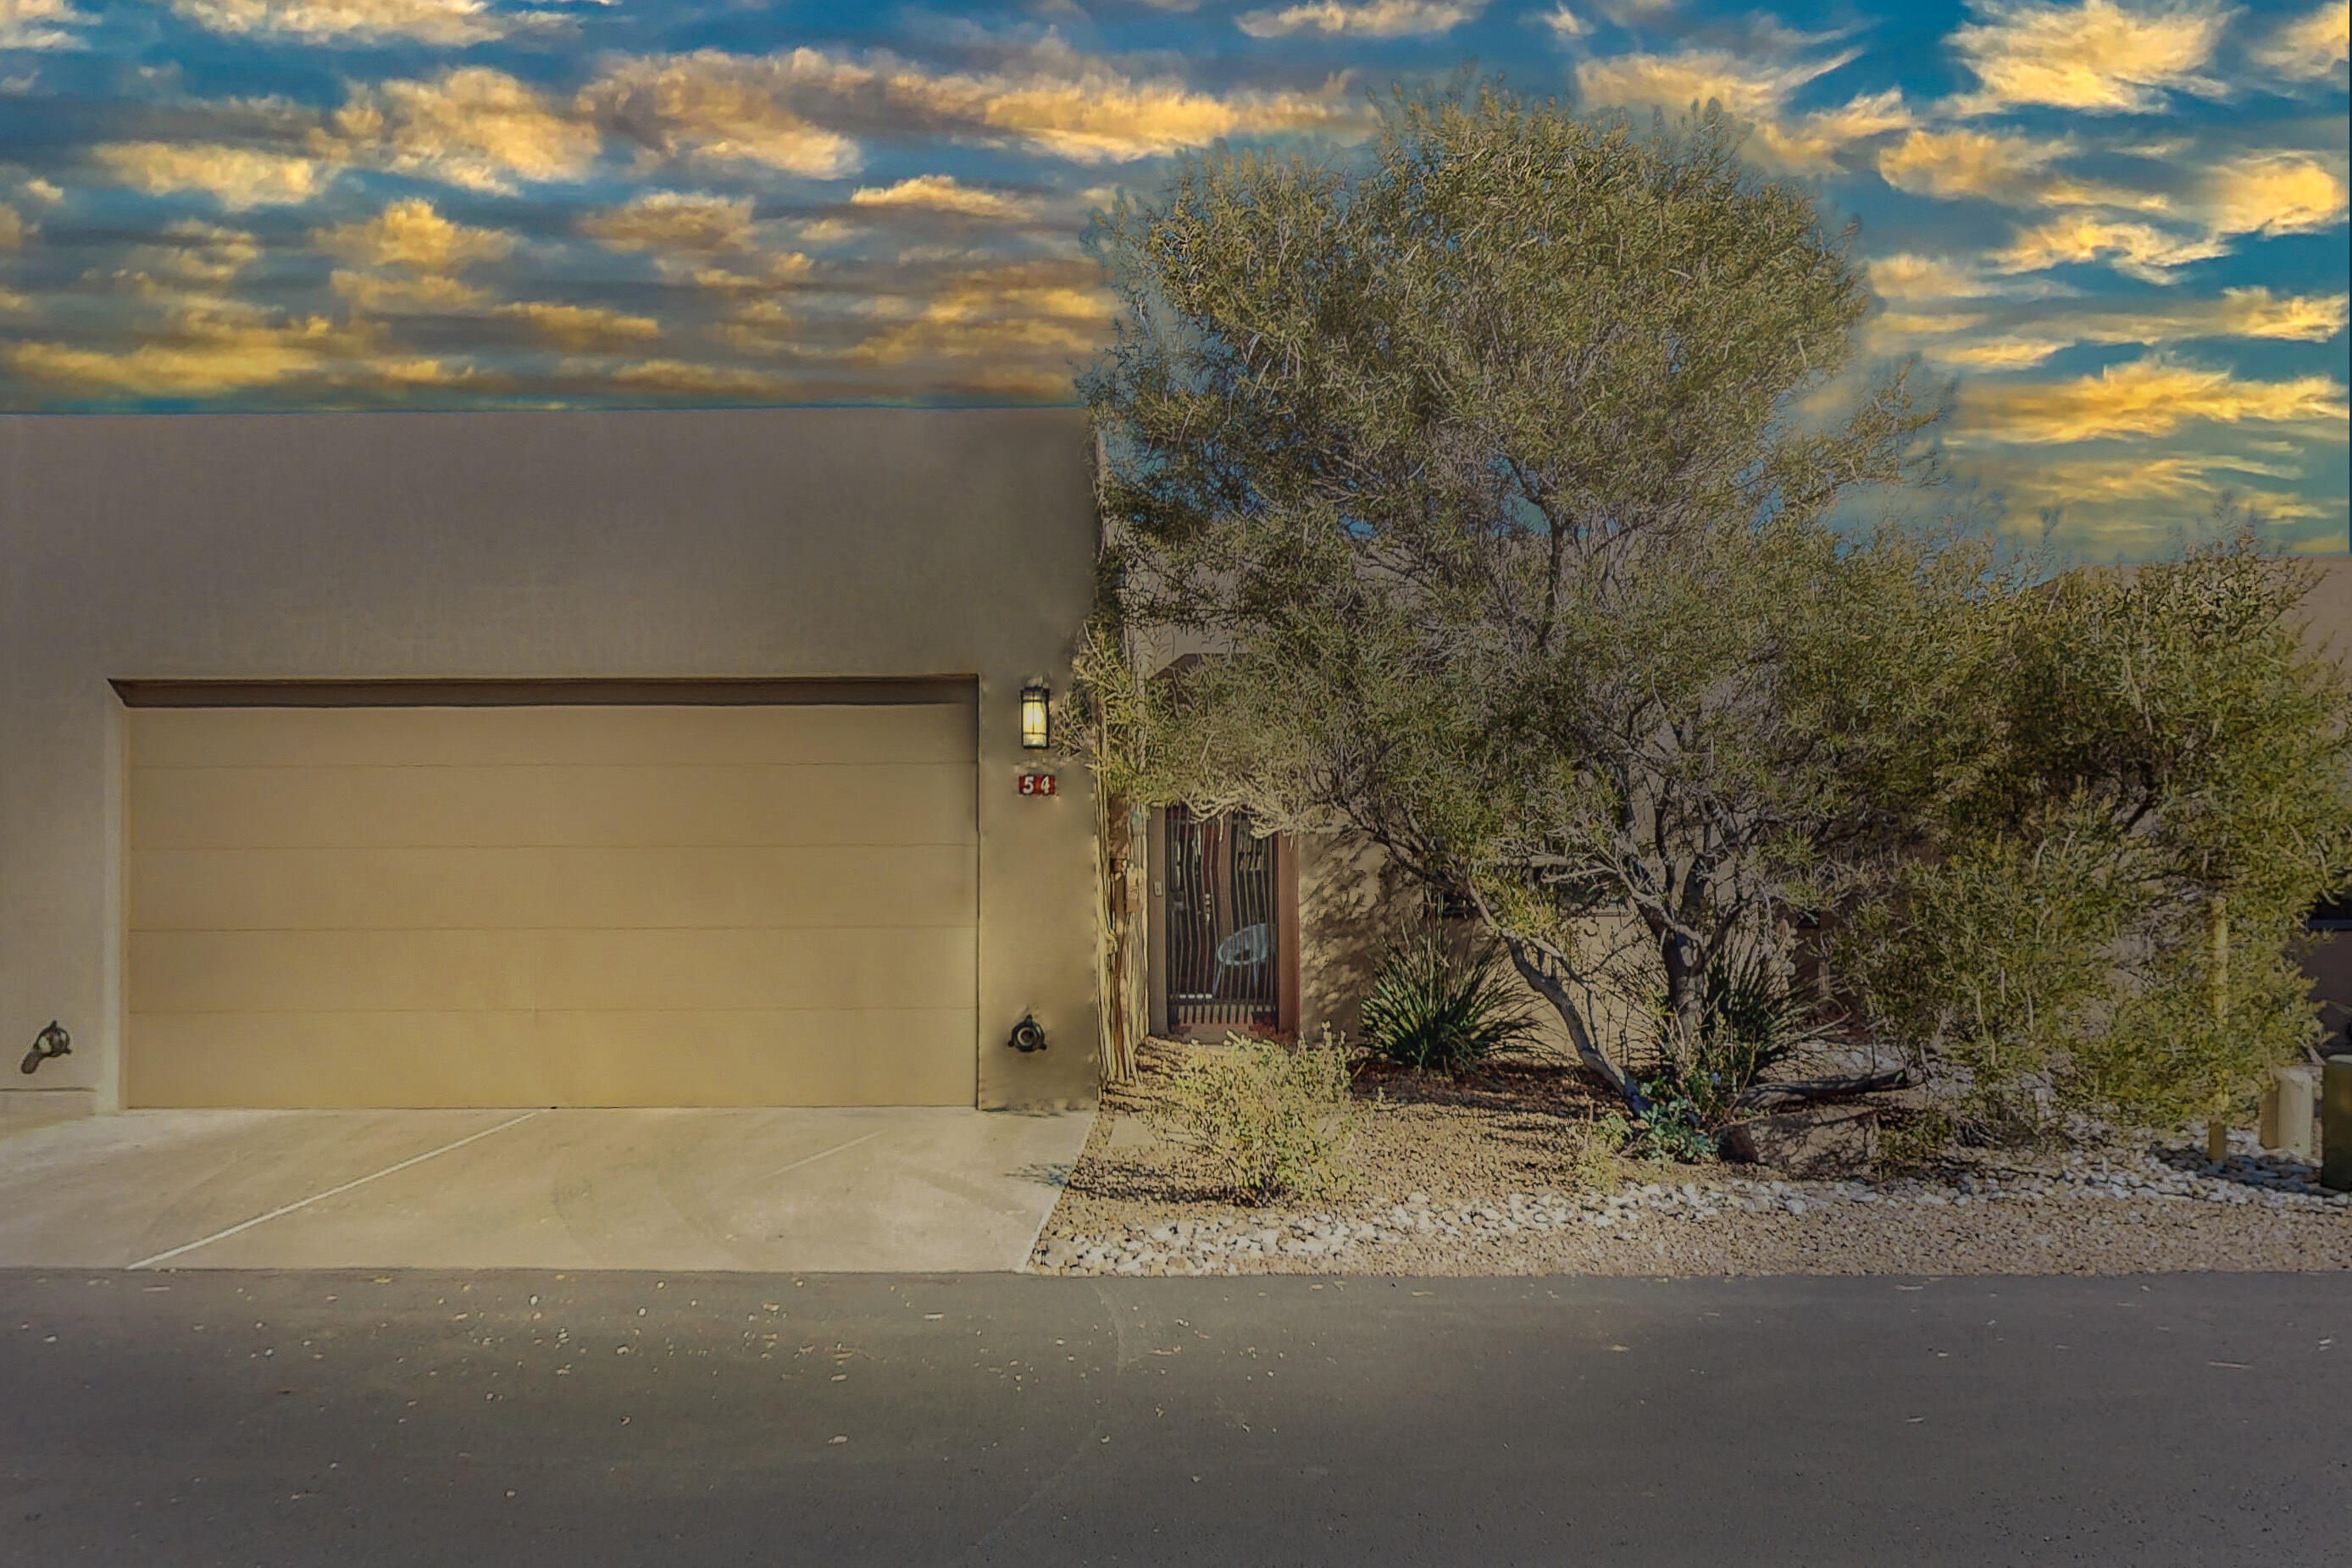 54 Wind Road NW, Albuquerque, New Mexico 87120, 3 Bedrooms Bedrooms, ,2 BathroomsBathrooms,Residential,For Sale,54 Wind Road NW,1044240